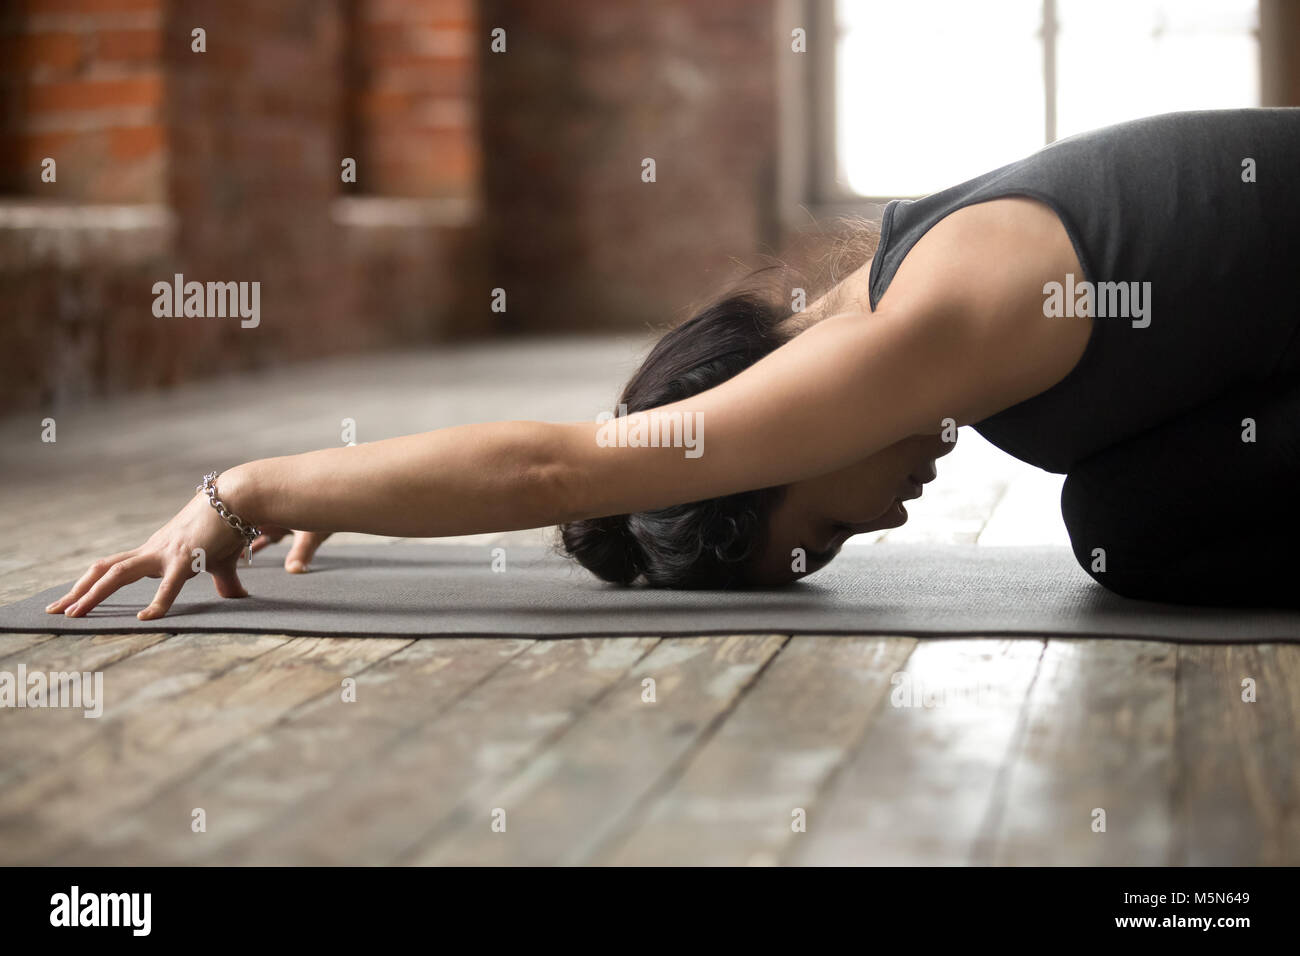 Young sporty woman practicing yoga, doing Child exercise, Balasana pose, working out, wearing black sportswear, indoor close up photo, yoga studio Stock Photo